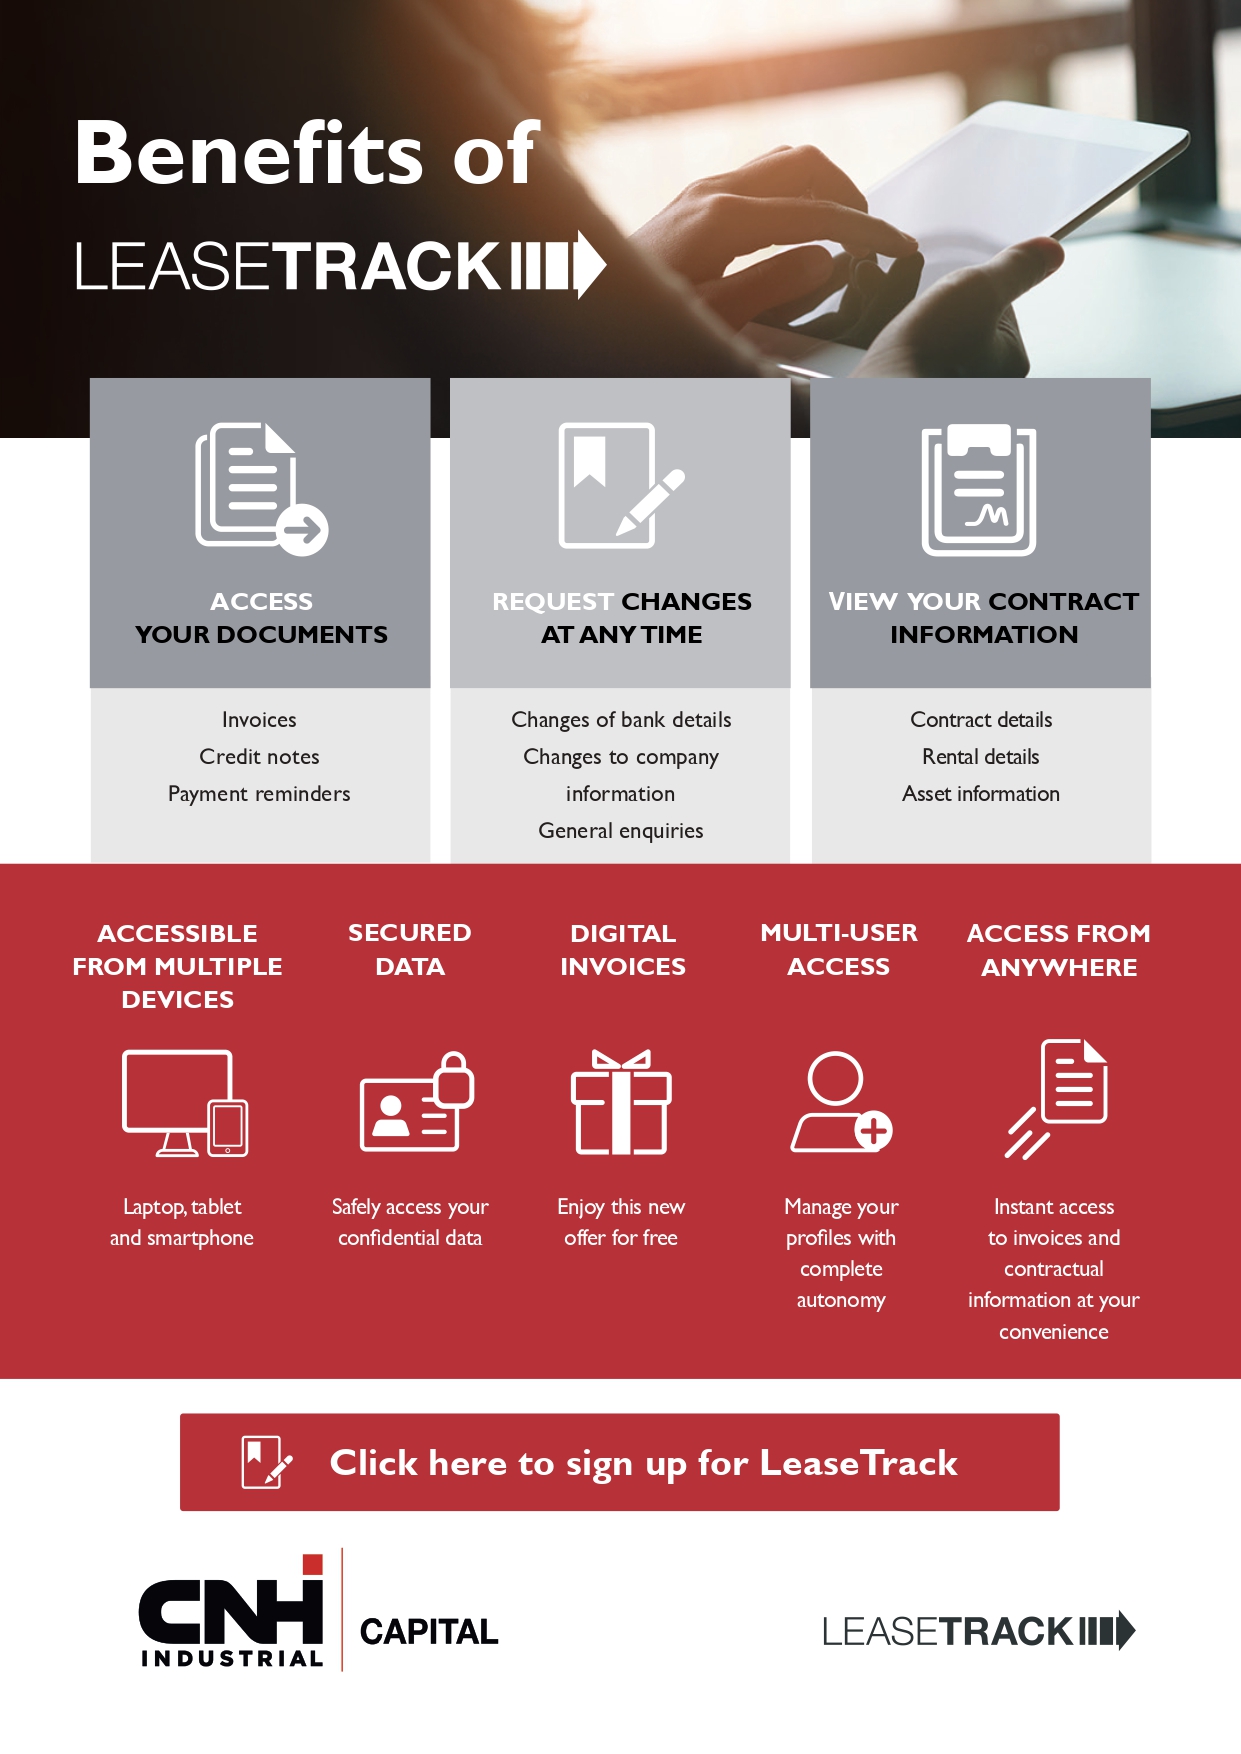 https://cnhicapital.leasetrack.fineasy.com